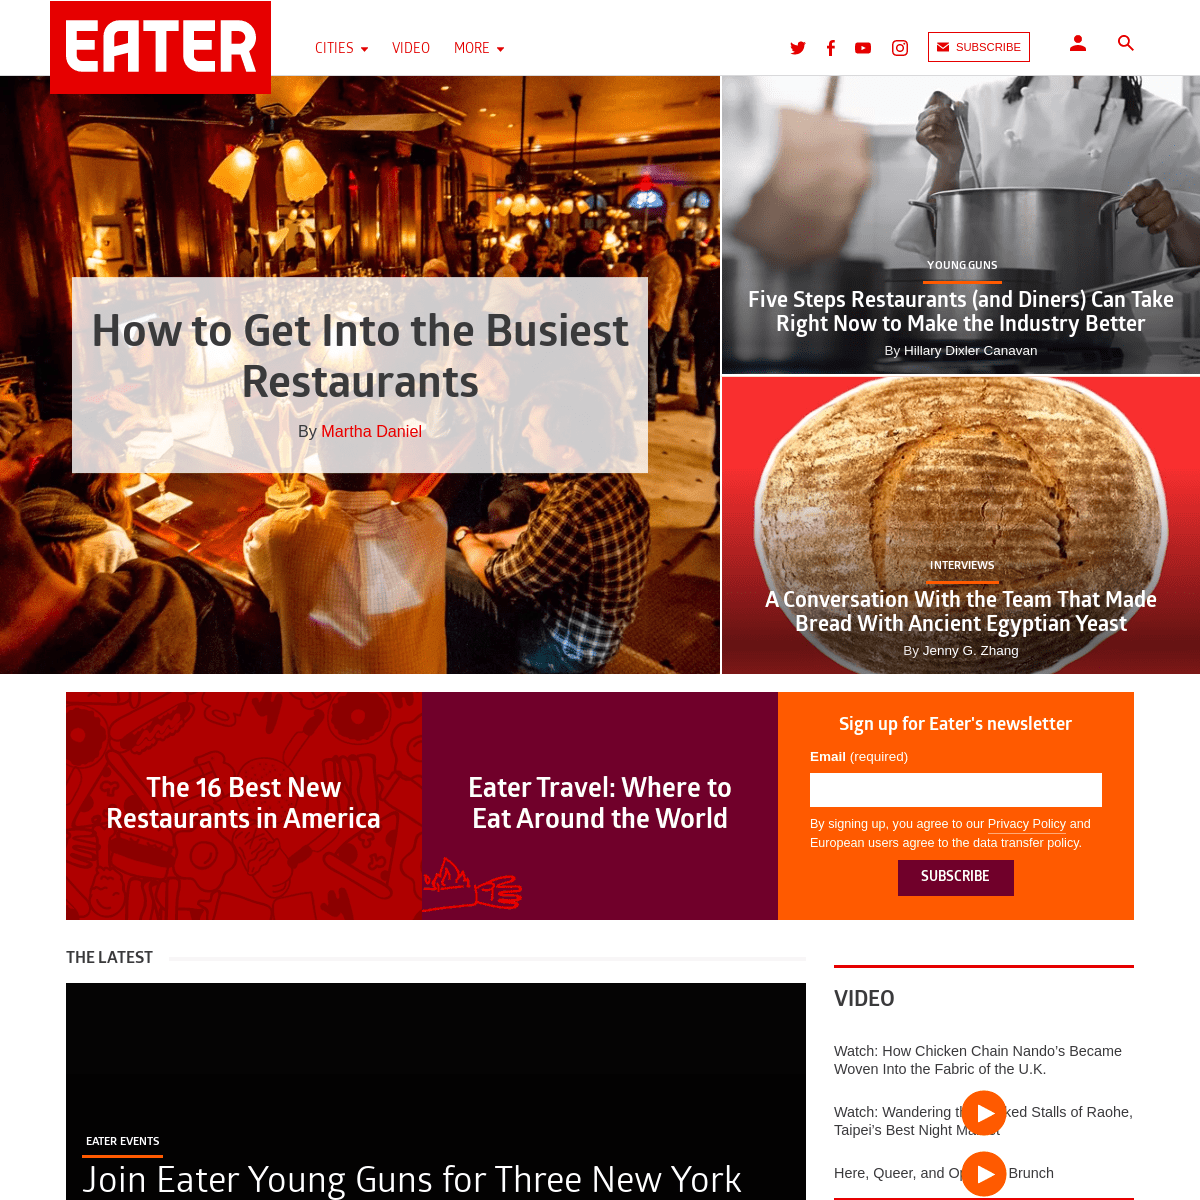 A complete backup of eater.com